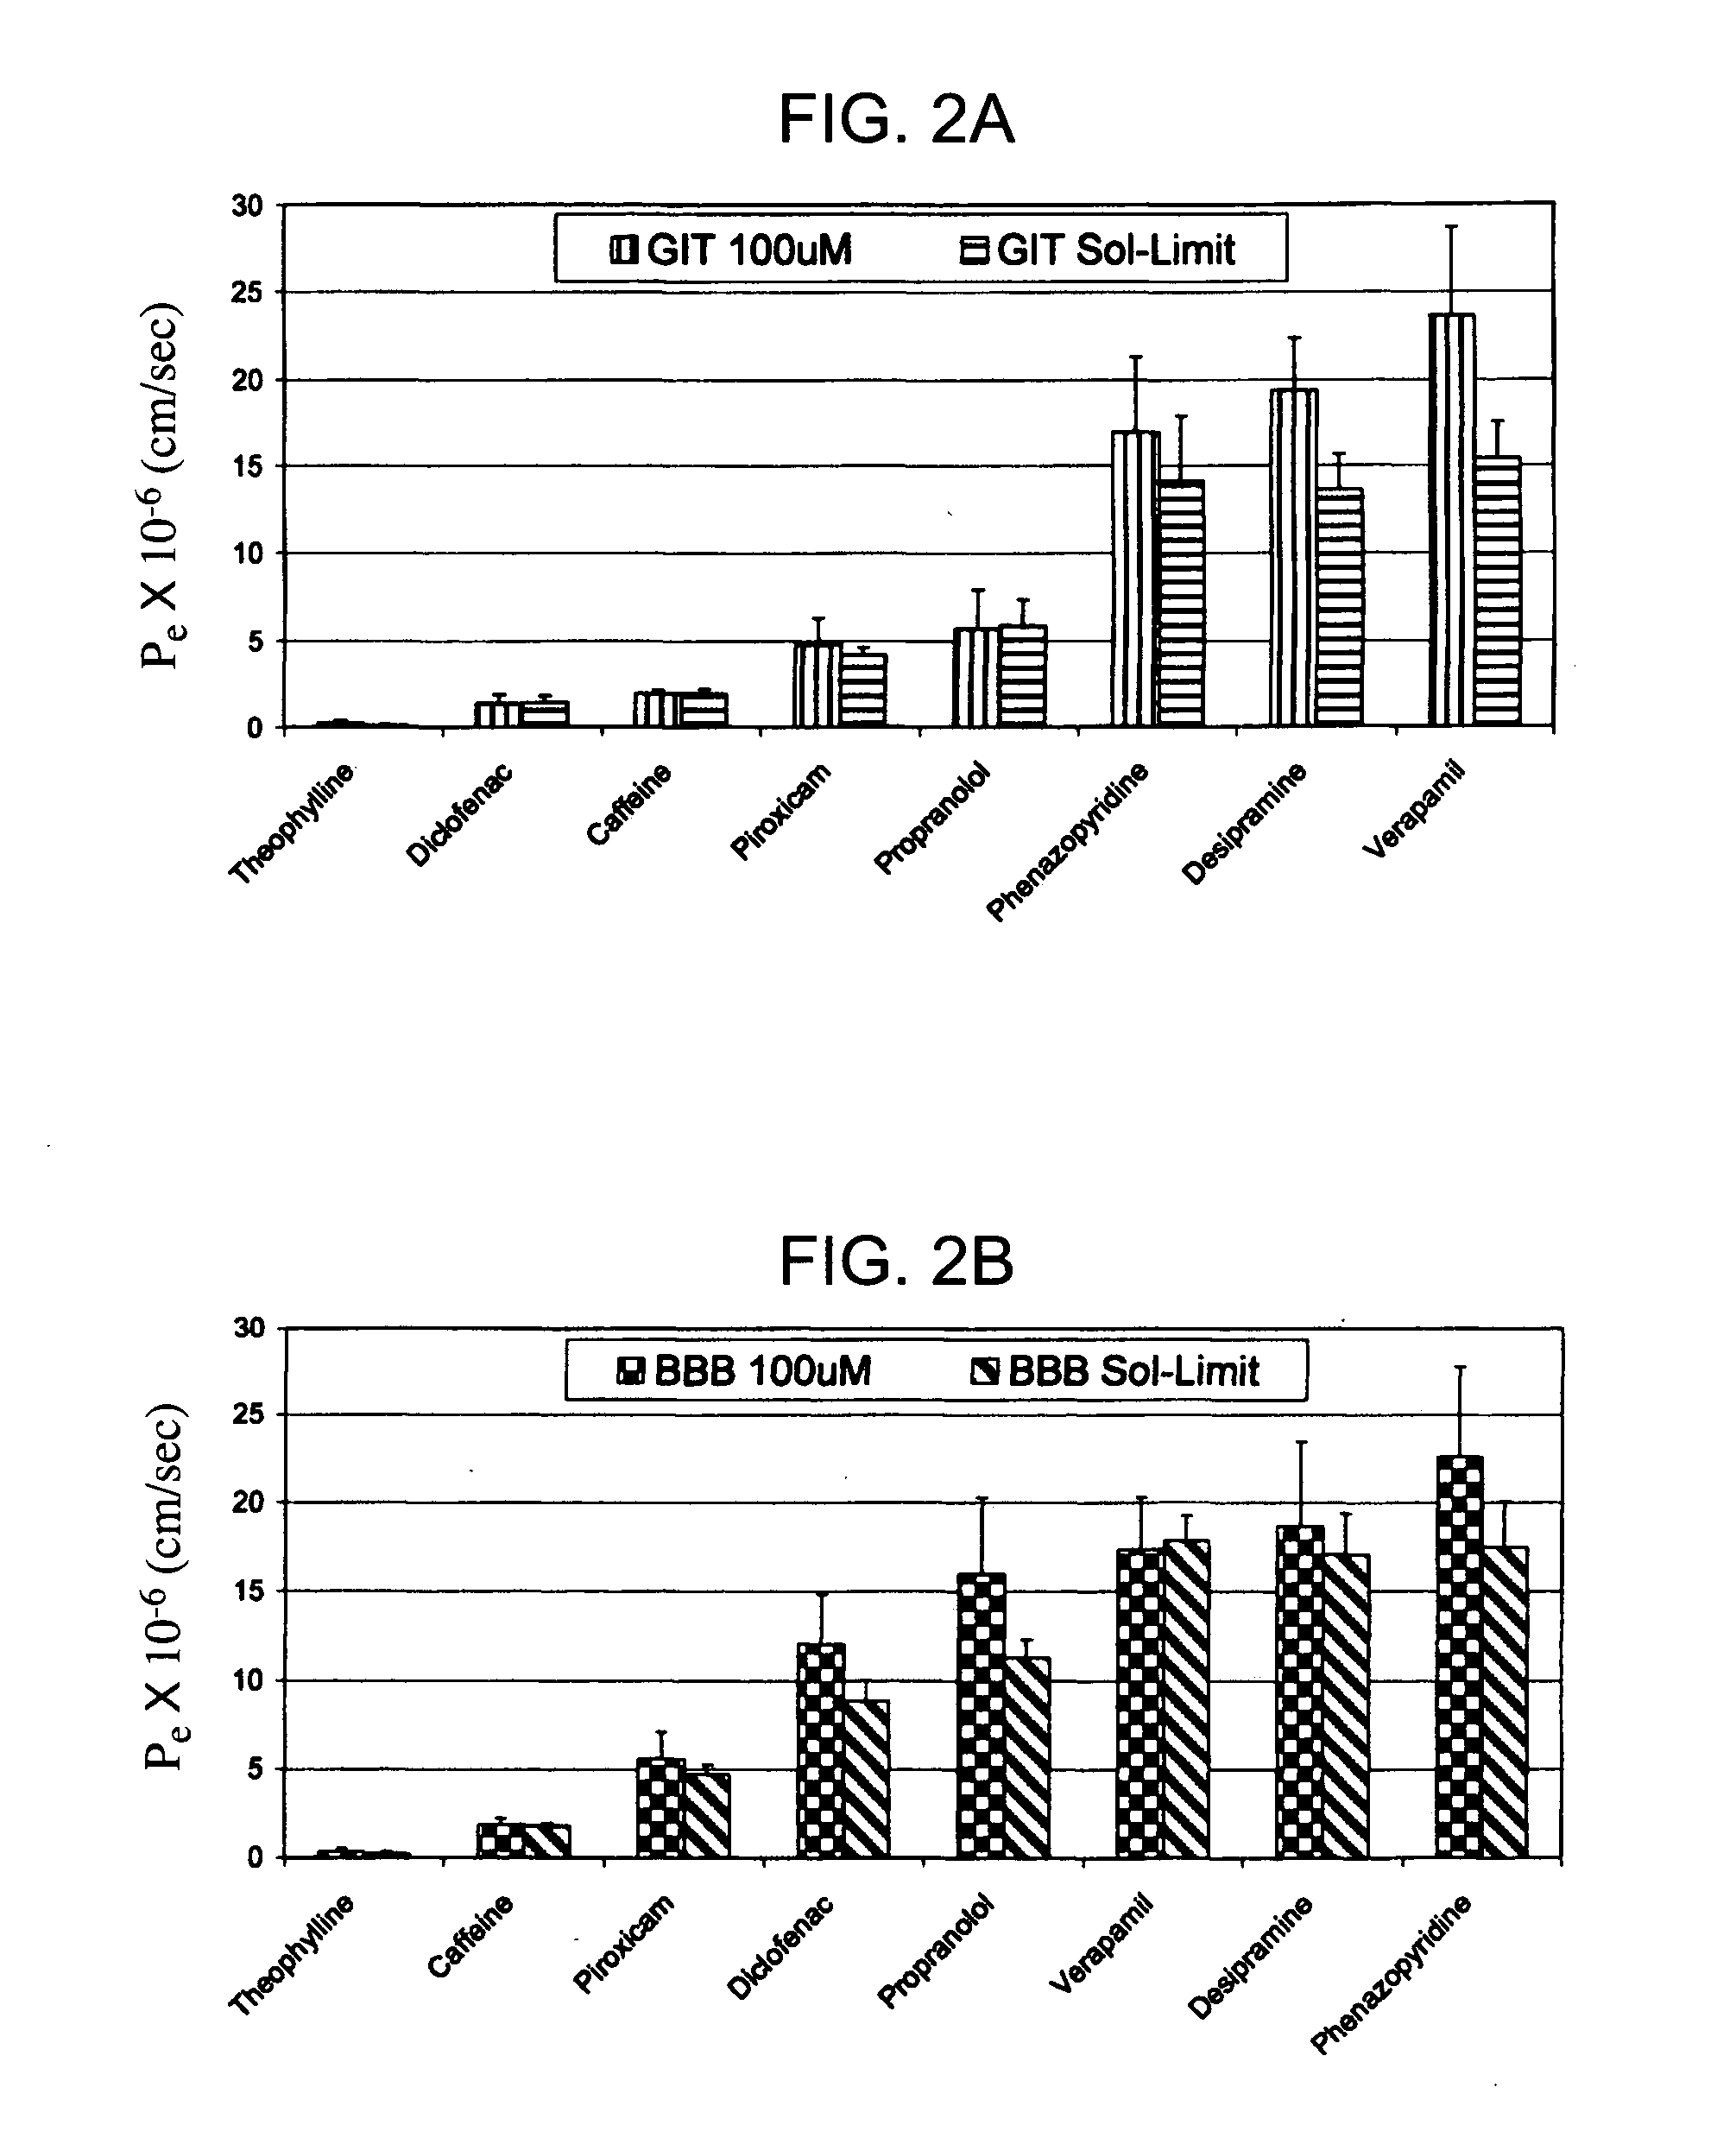 Combination of solubility and membrane permeability measurement methods for profiling of chemical compounds